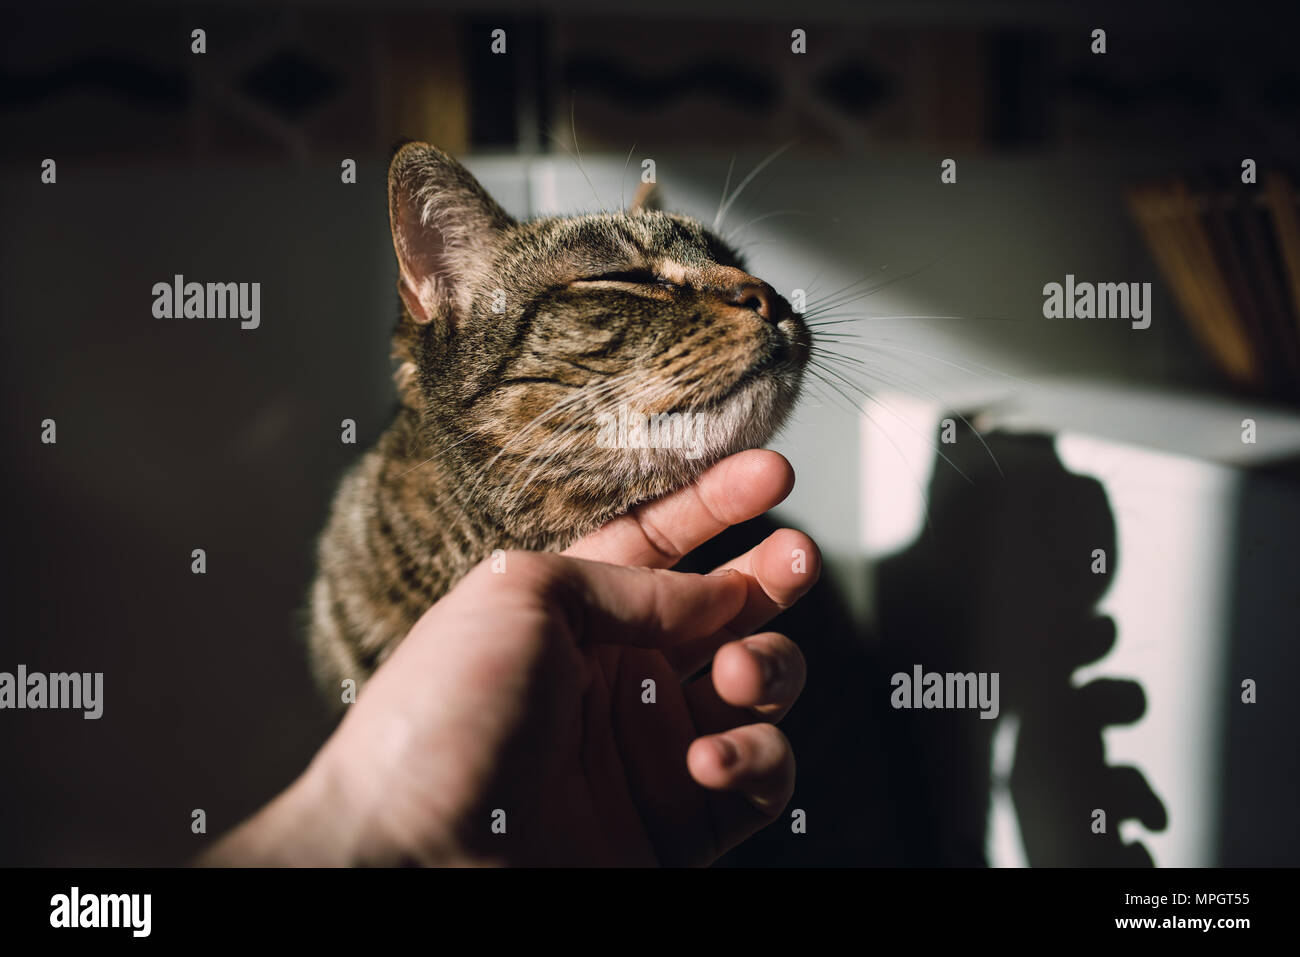 Human hand stroking a tabby cat at home Stock Photo